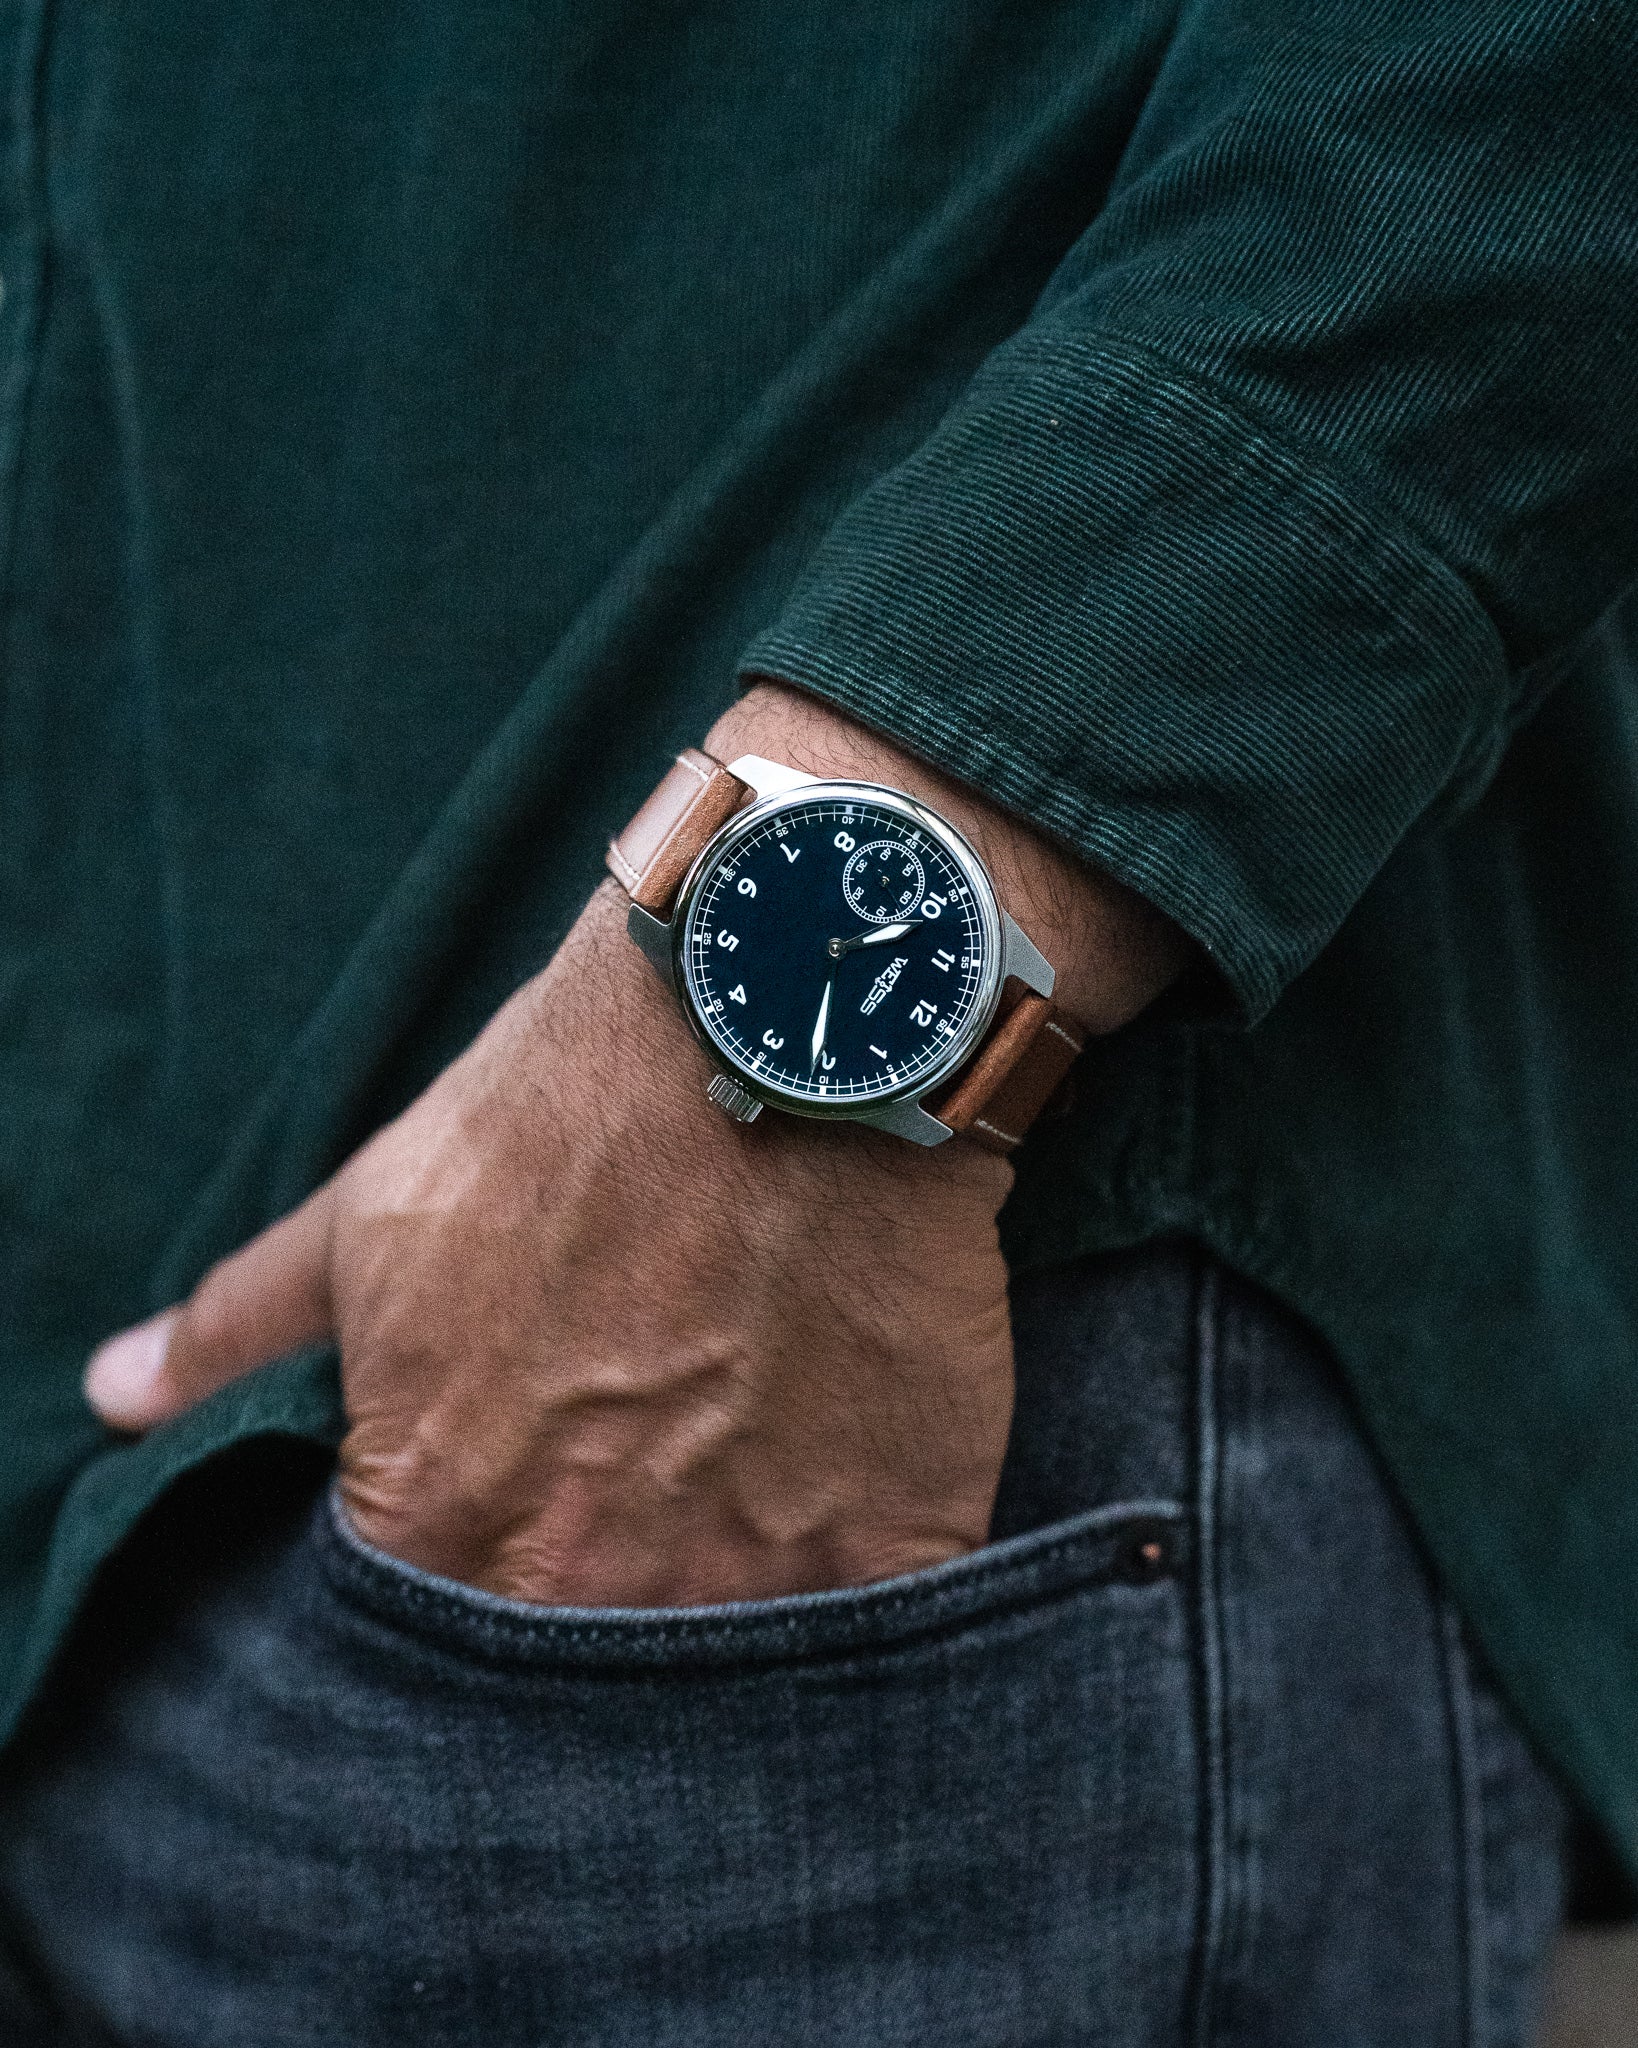 Downsizing: Six New Watches Under 40-mm from Top Brands | WatchTime - USA's  No.1 Watch Magazine